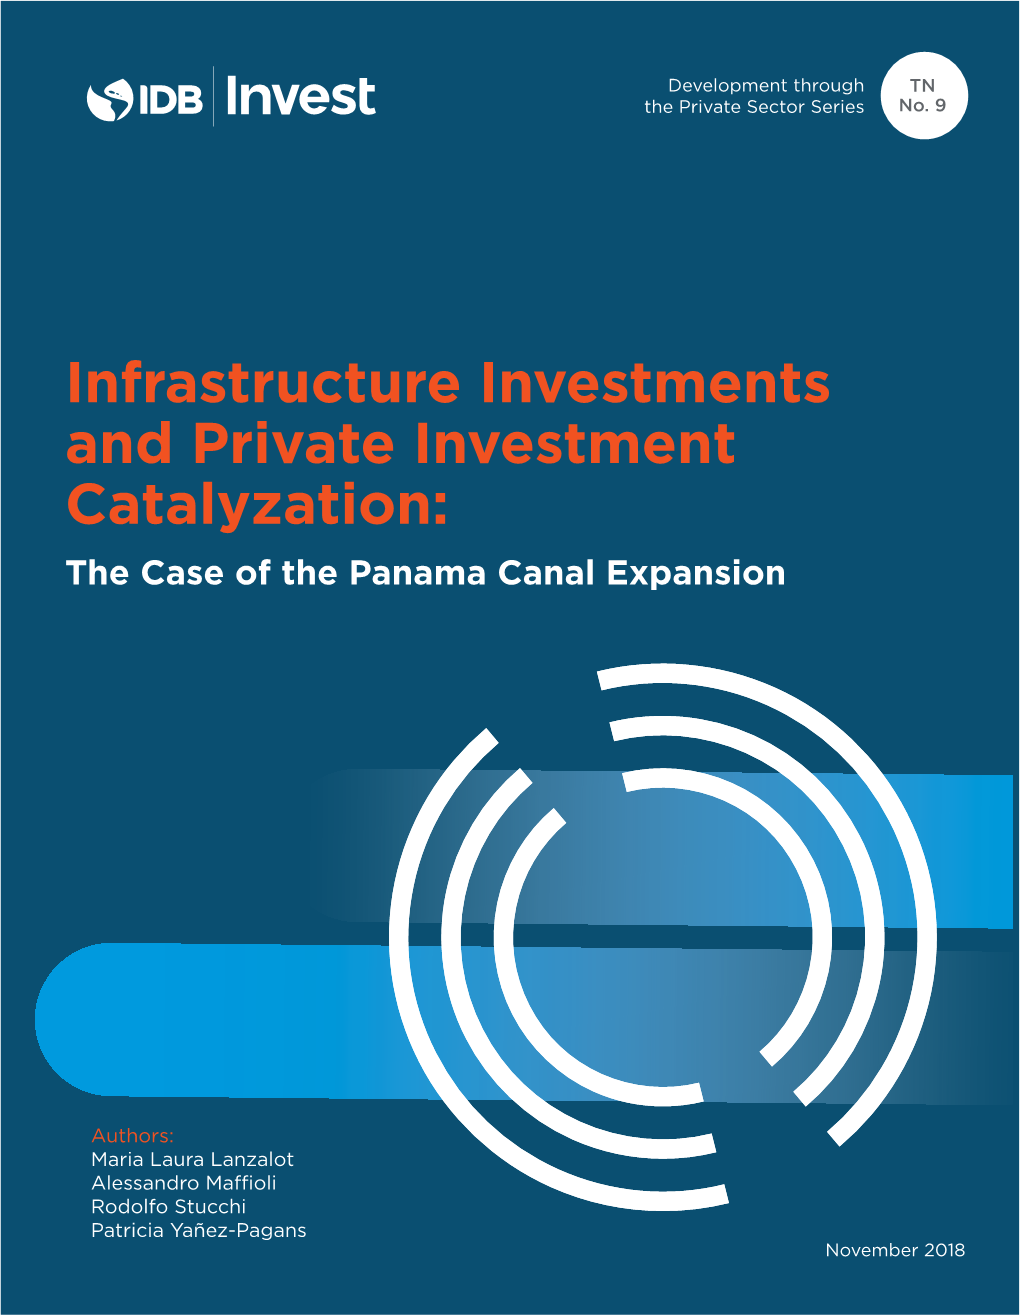 Infrastructure Investments and Private Investment Catalyzation: the Case of the Panama Canal Expansion